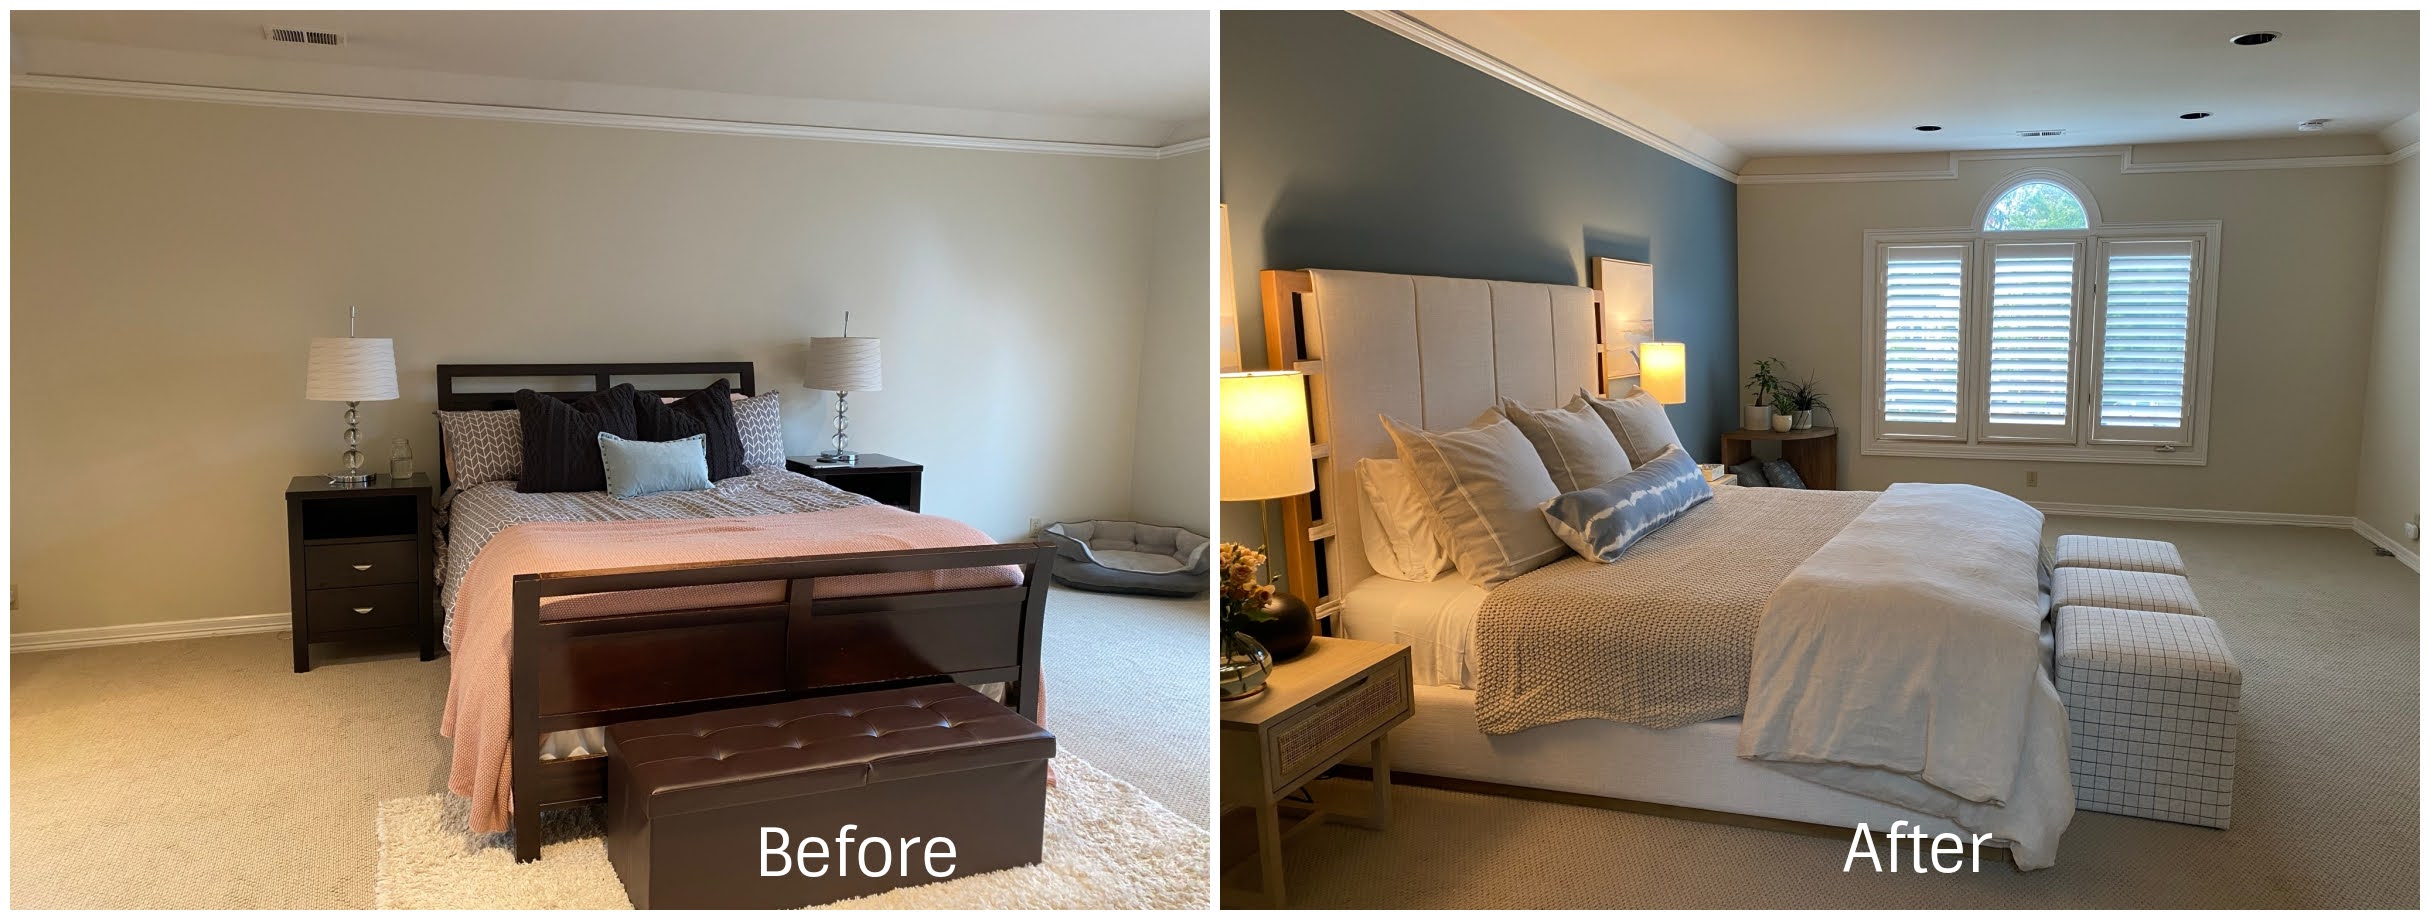 A bedroom transformed into an Indoor Elegance with a Splash of Paint.